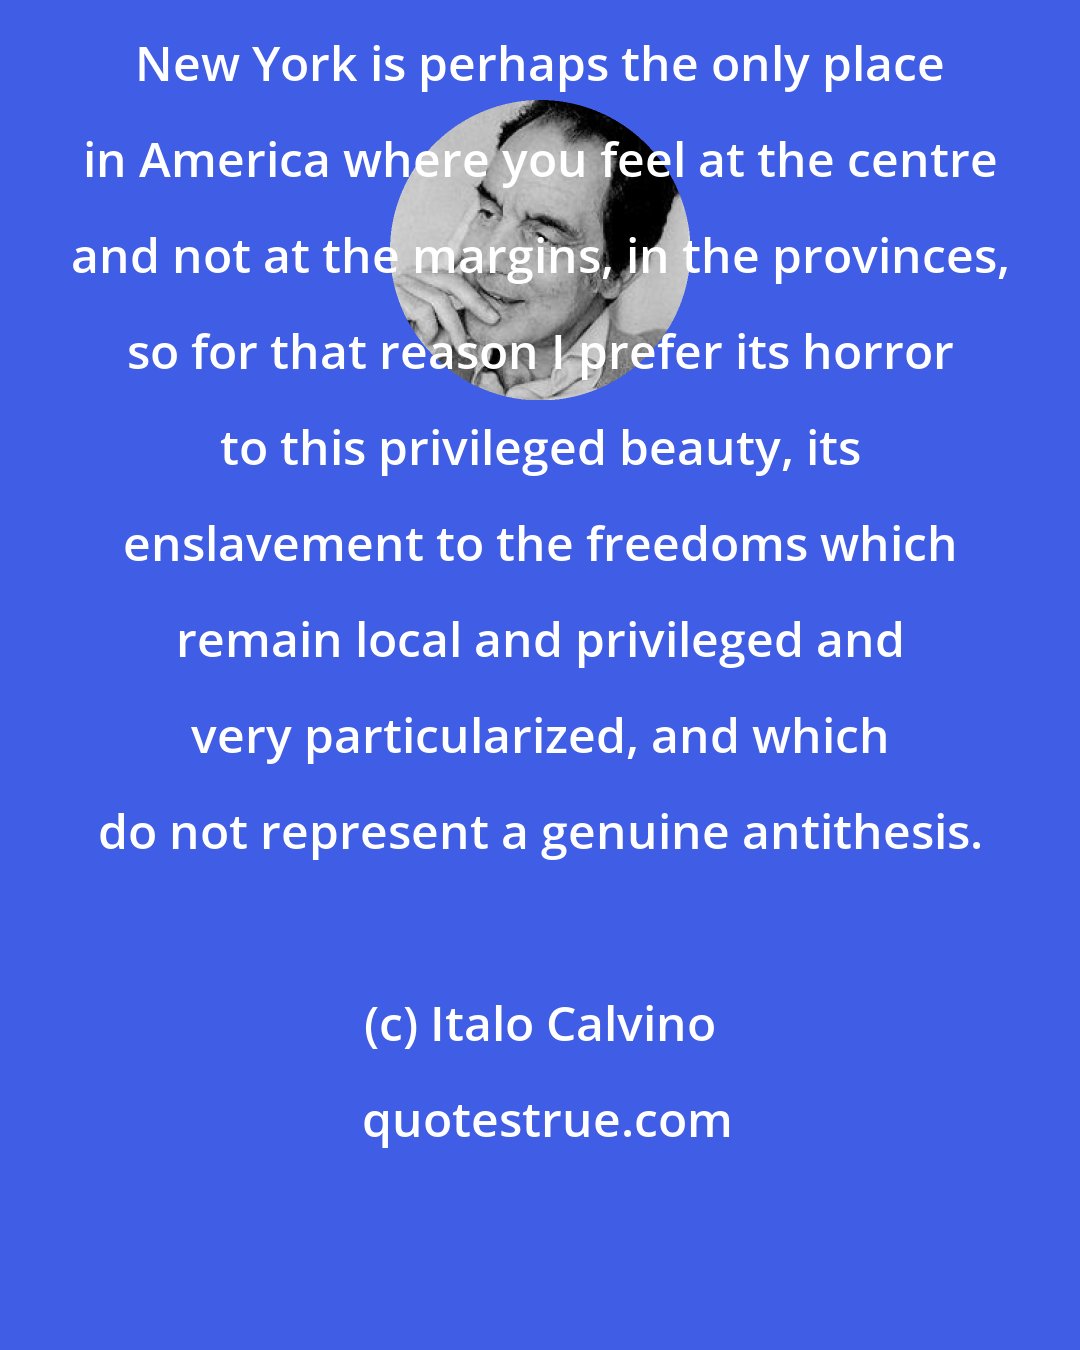 Italo Calvino: New York is perhaps the only place in America where you feel at the centre and not at the margins, in the provinces, so for that reason I prefer its horror to this privileged beauty, its enslavement to the freedoms which remain local and privileged and very particularized, and which do not represent a genuine antithesis.